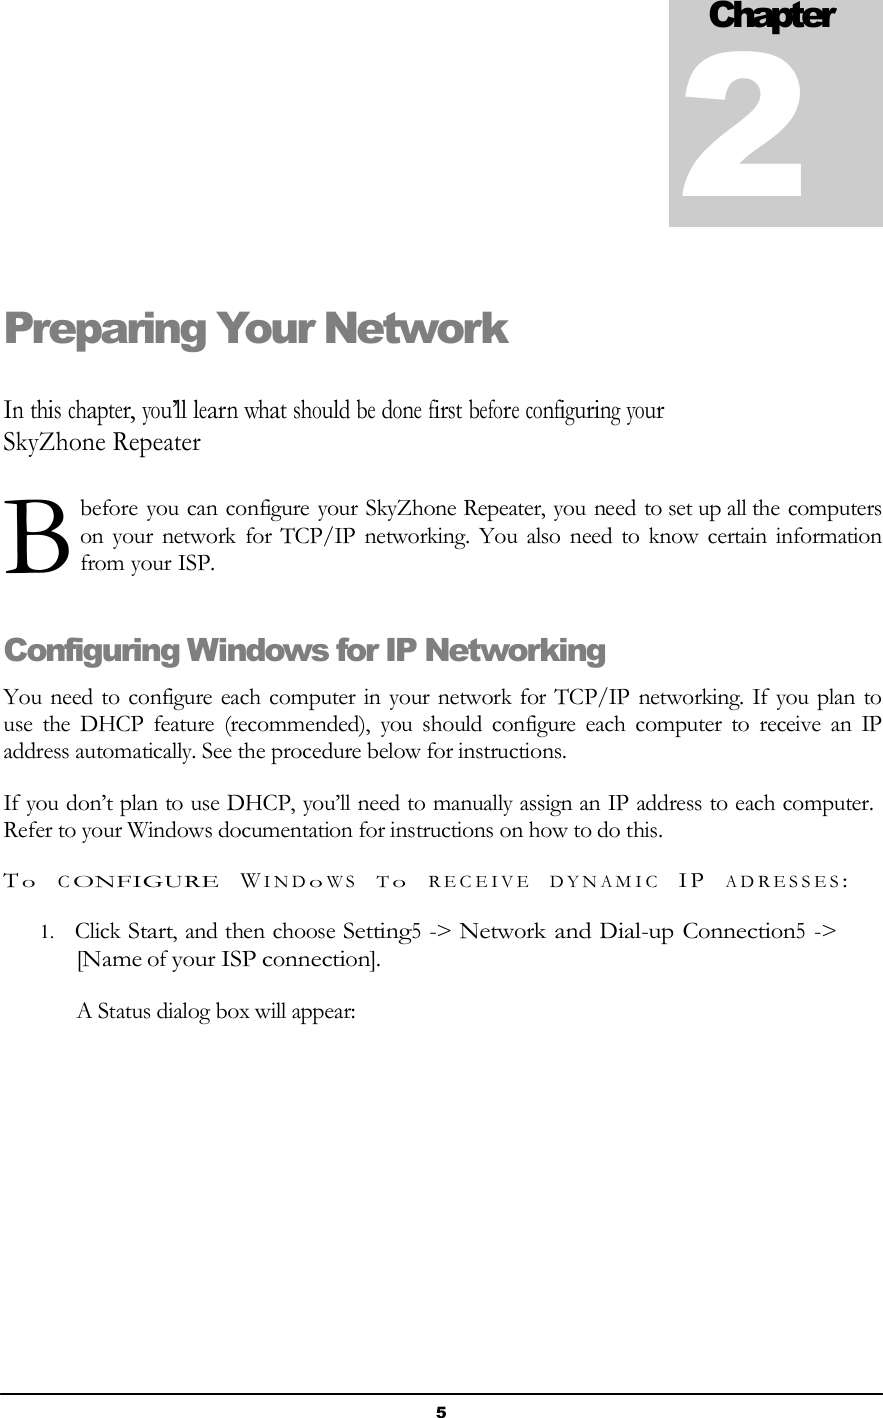 5    BChapter 2    Preparing Your Network   In this chapter, you’ll learn what should be done first before configuring your SkyZhone Repeater   before you can configure your SkyZhone Repeater, you need to set up all the computers   on your network for TCP/IP networking. You also need to know certain information from your ISP.   Configuring Windows for IP Networking  You need to configure each computer in your network for TCP/IP networking. If you plan to use  the  DHCP  feature  (recommended),  you  should  configure  each  computer  to  receive  an  IP address automatically. See the procedure below for instructions.  If you don’t plan to use DHCP, you’ll need to manually assign an IP address to each computer. Refer to your Windows documentation for instructions on how to do this.  T o   C ONFIGURE   W I N D o W S   T o   R E C E I V E   D Y N A M I C   I P   A D R E S S E S :  1. Click Start, and then choose Setting5 -&gt; Network and Dial-up Connection5 -&gt; [Name of your ISP connection].  A Status dialog box will appear: 